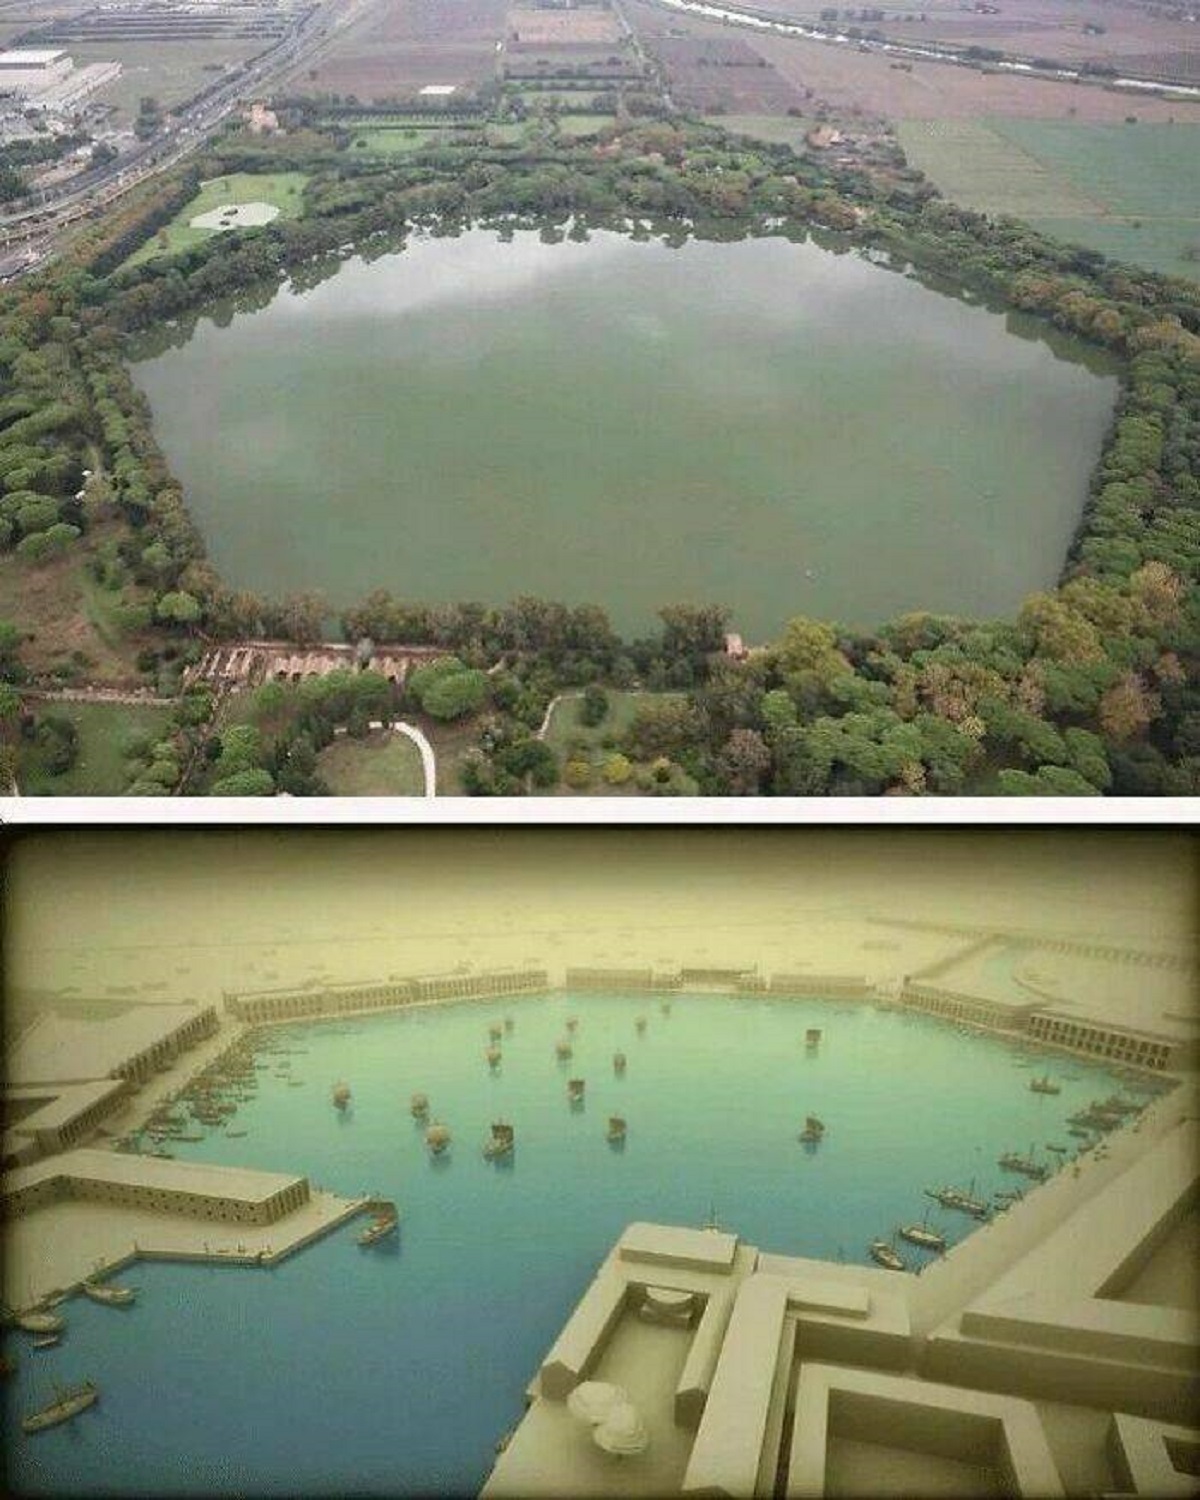 "Portus, Roman Empire's Imperial Port, As It Would Have Appeared In The Past Compared To Today. The Port Was Established By Emperor Claudius, And Enlarged By Emperor Trajan, To Supplement The Nearby Port Of Ostia"